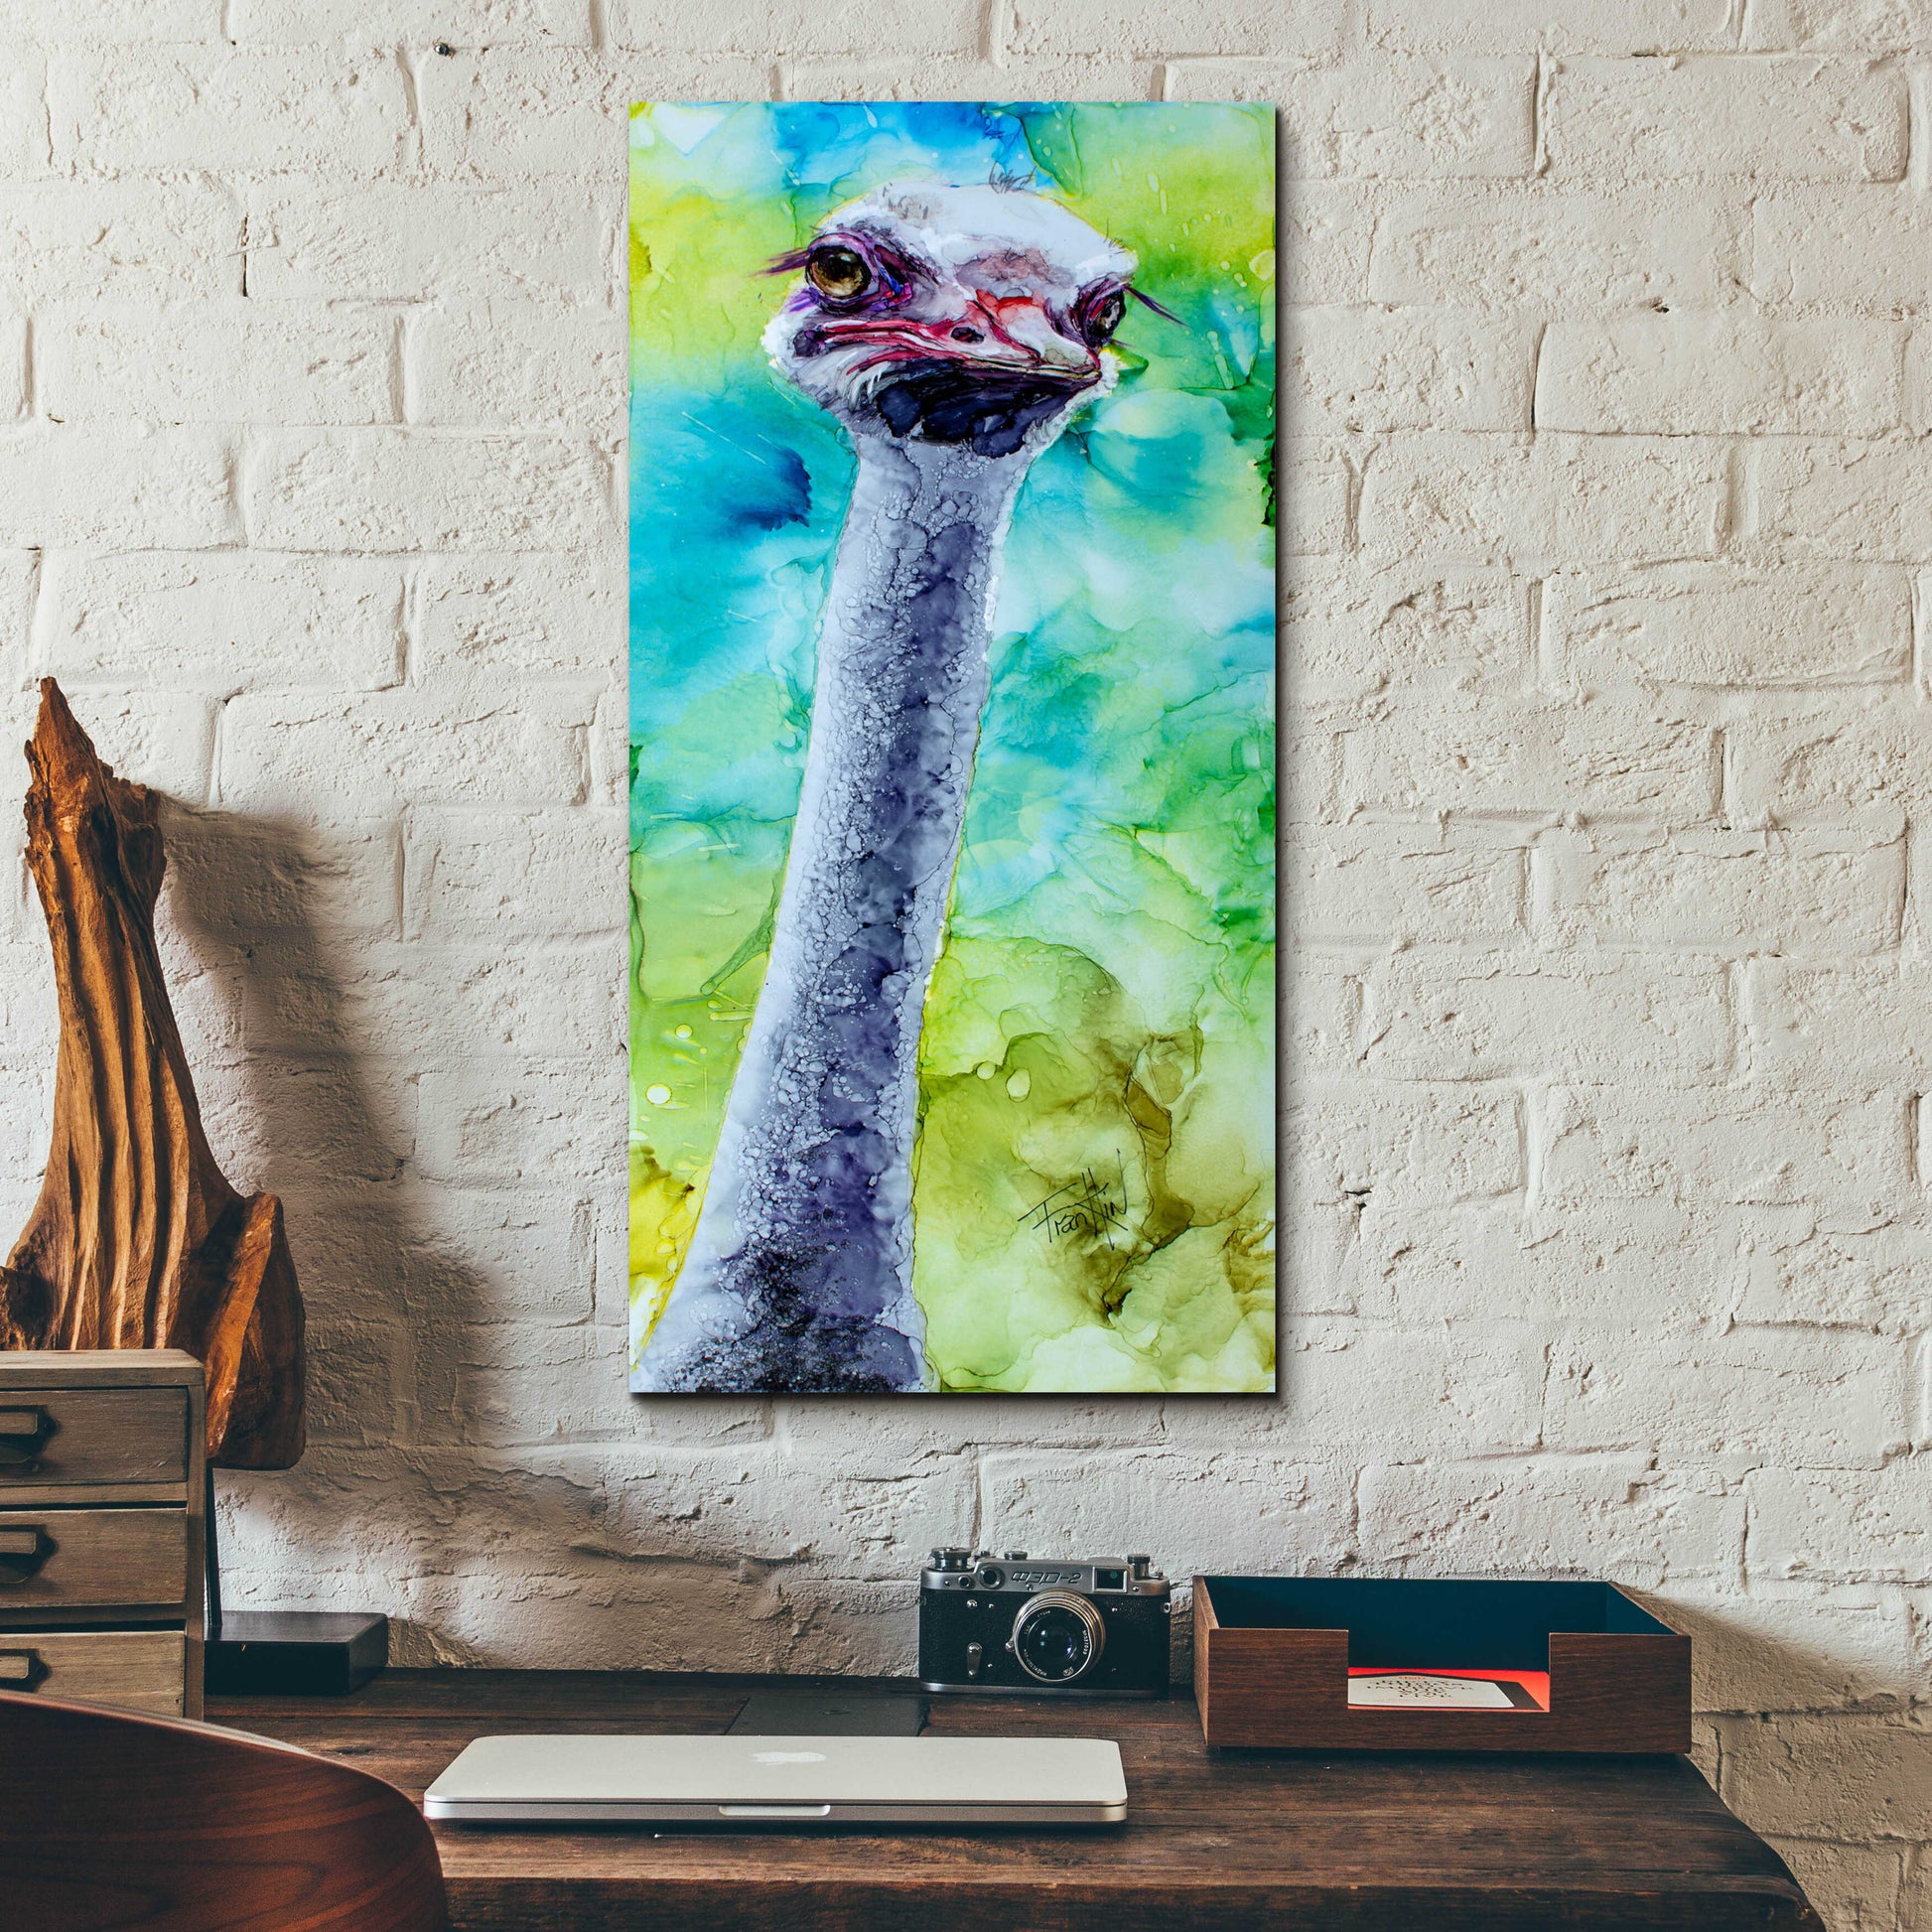 Epic Art 'Jelly Of My Lashes_' by Leslie Franklin, Acrylic Glass Wall Art,12x24